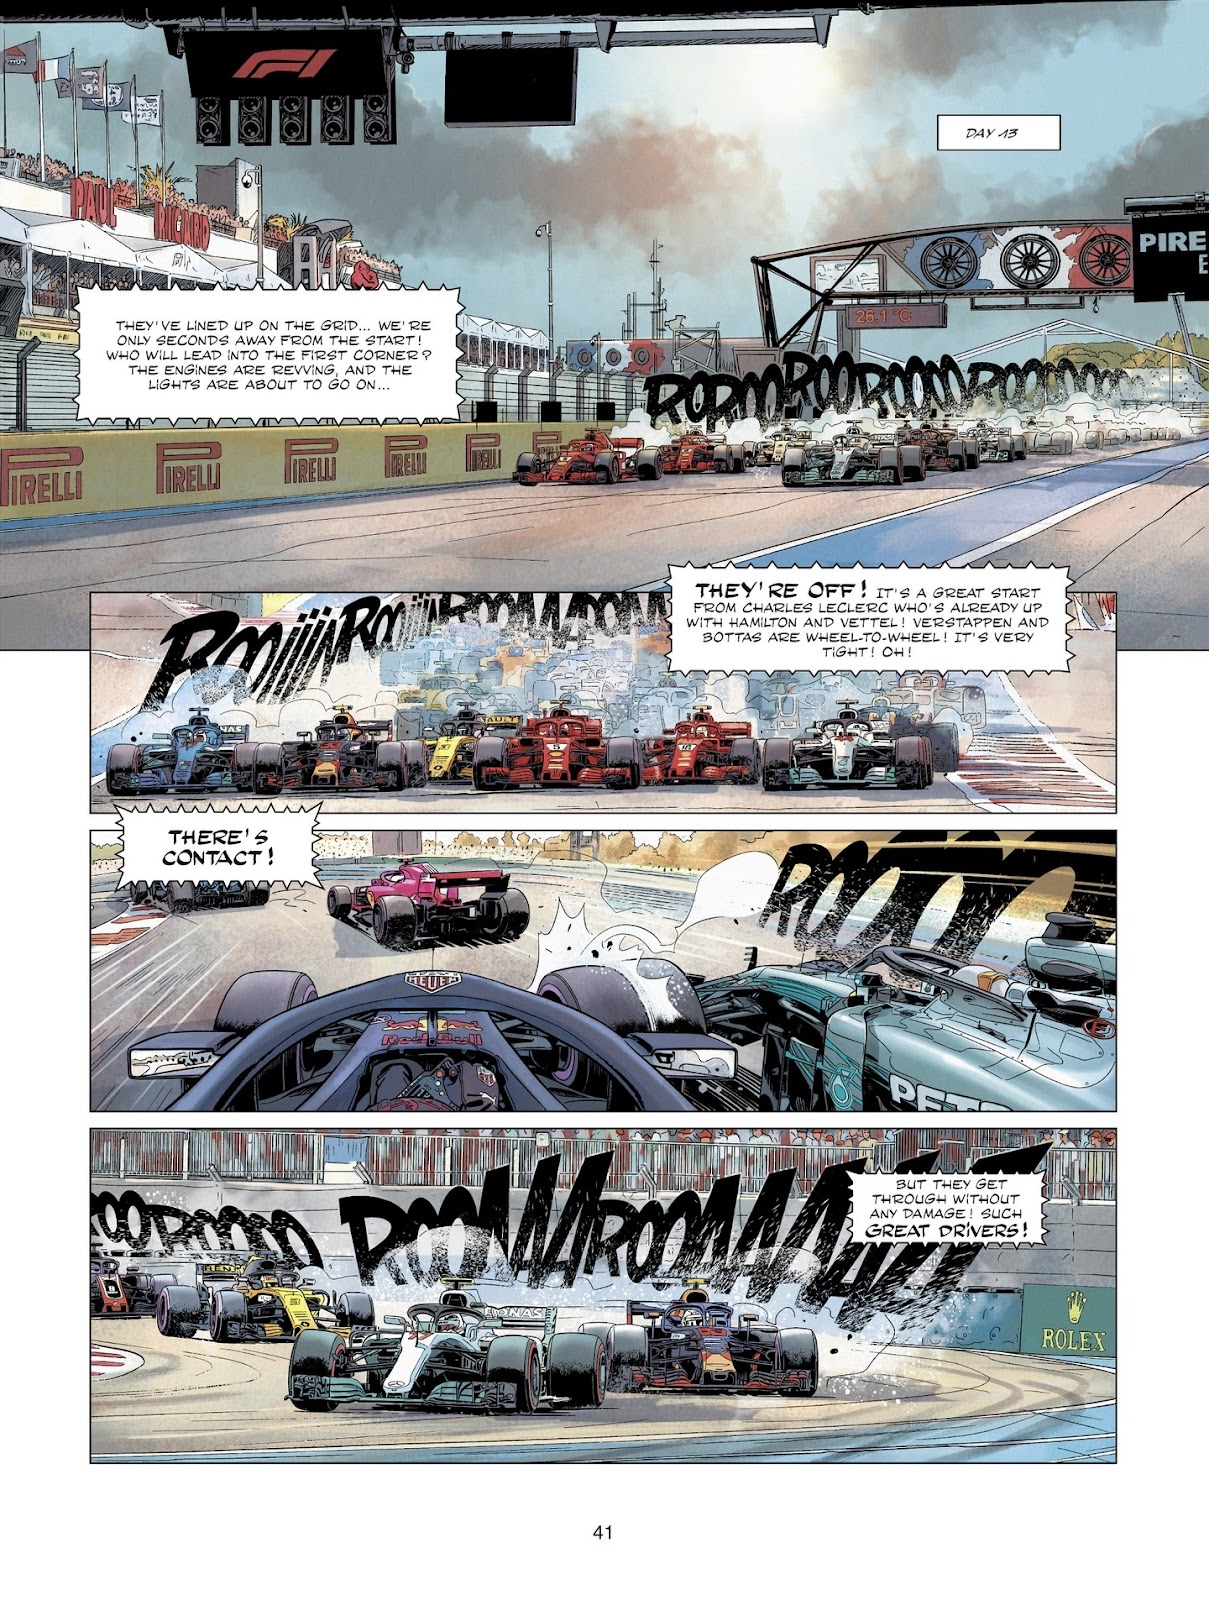 Michel Vaillant issue 8 - Page 41